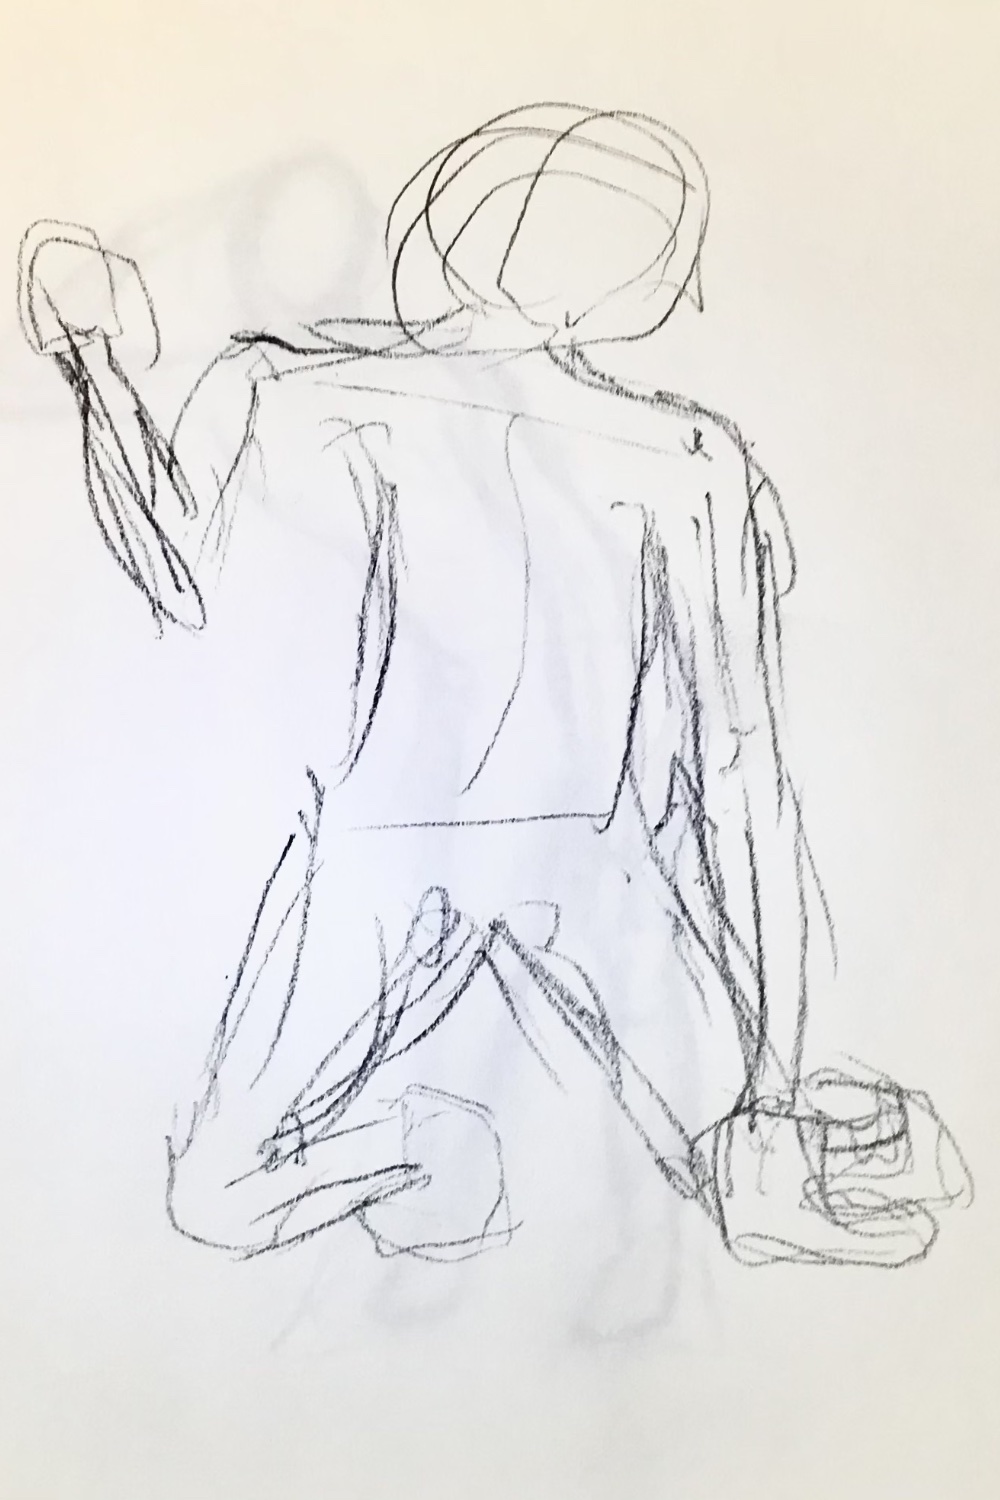 Gesture Exercise